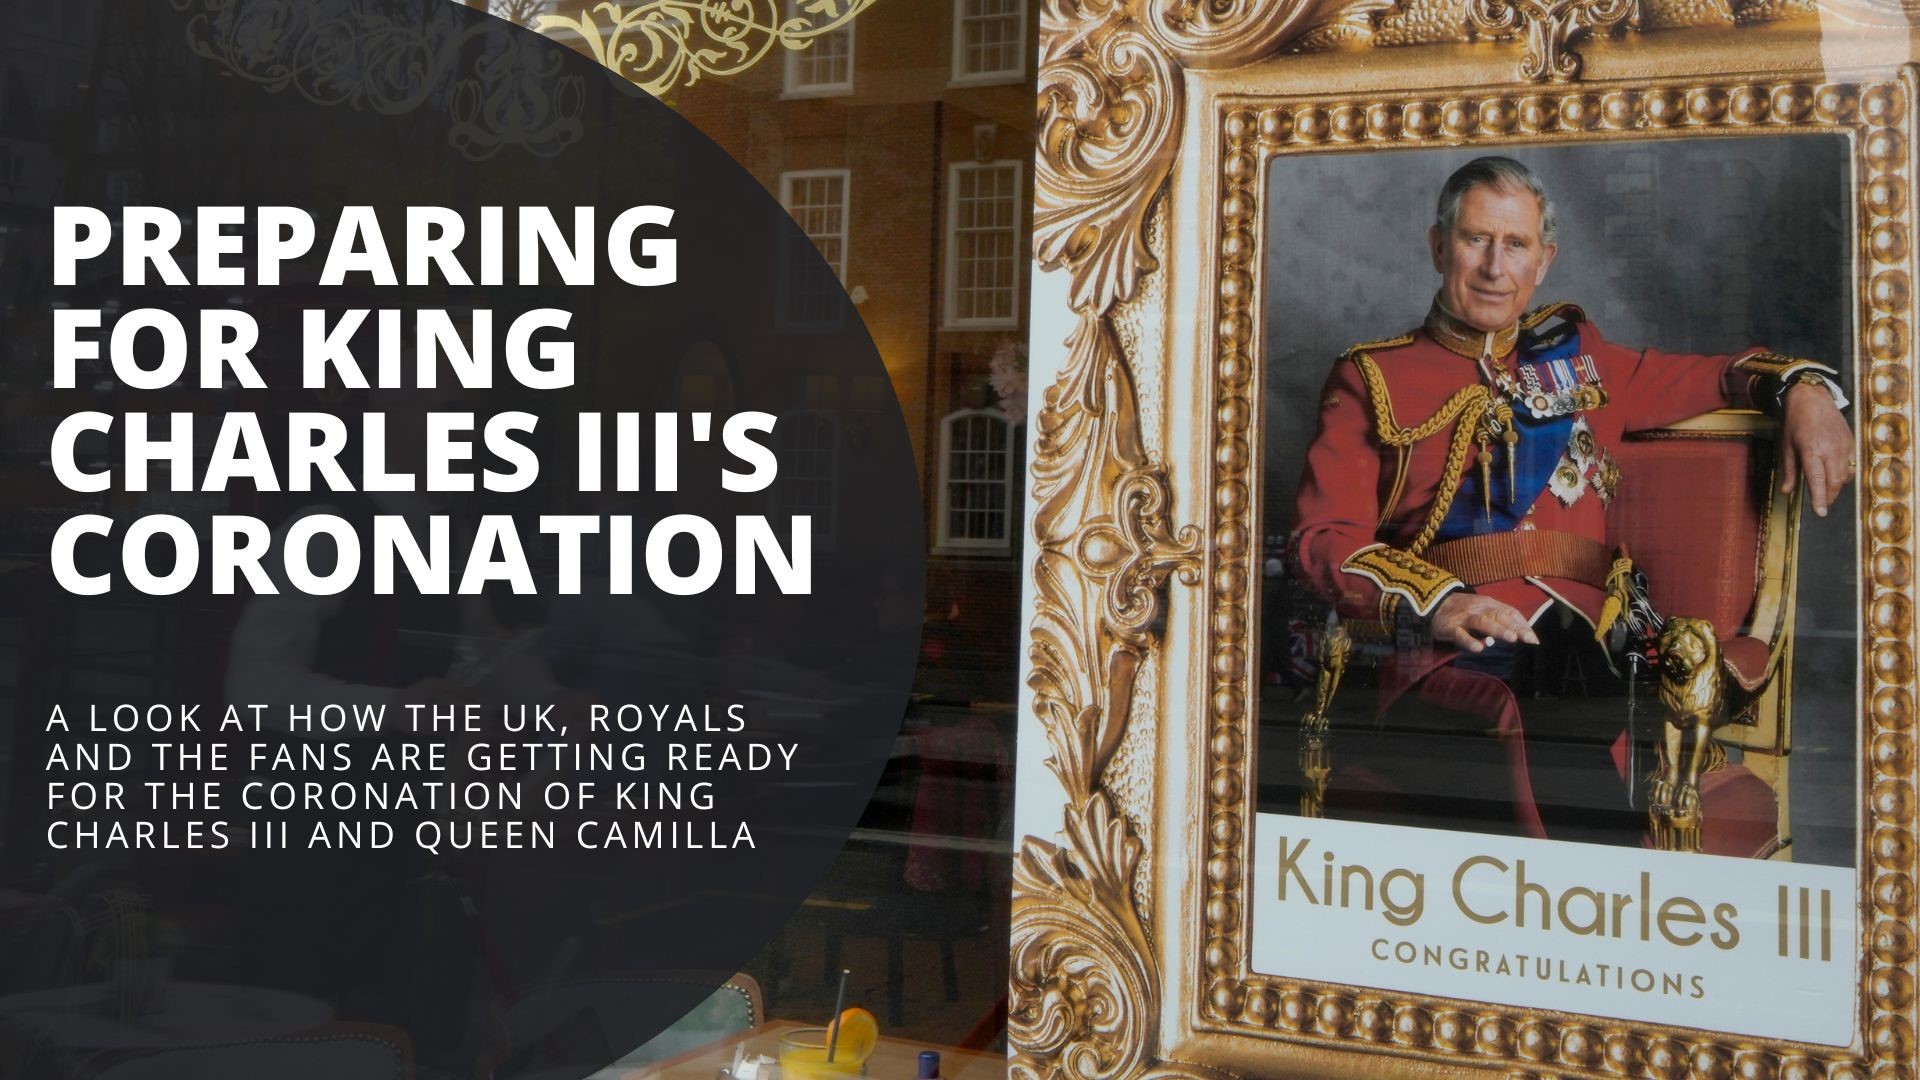 The coronation for King Charles III is May 6, 2023. A look at the preparations underway and what we know about the big day.